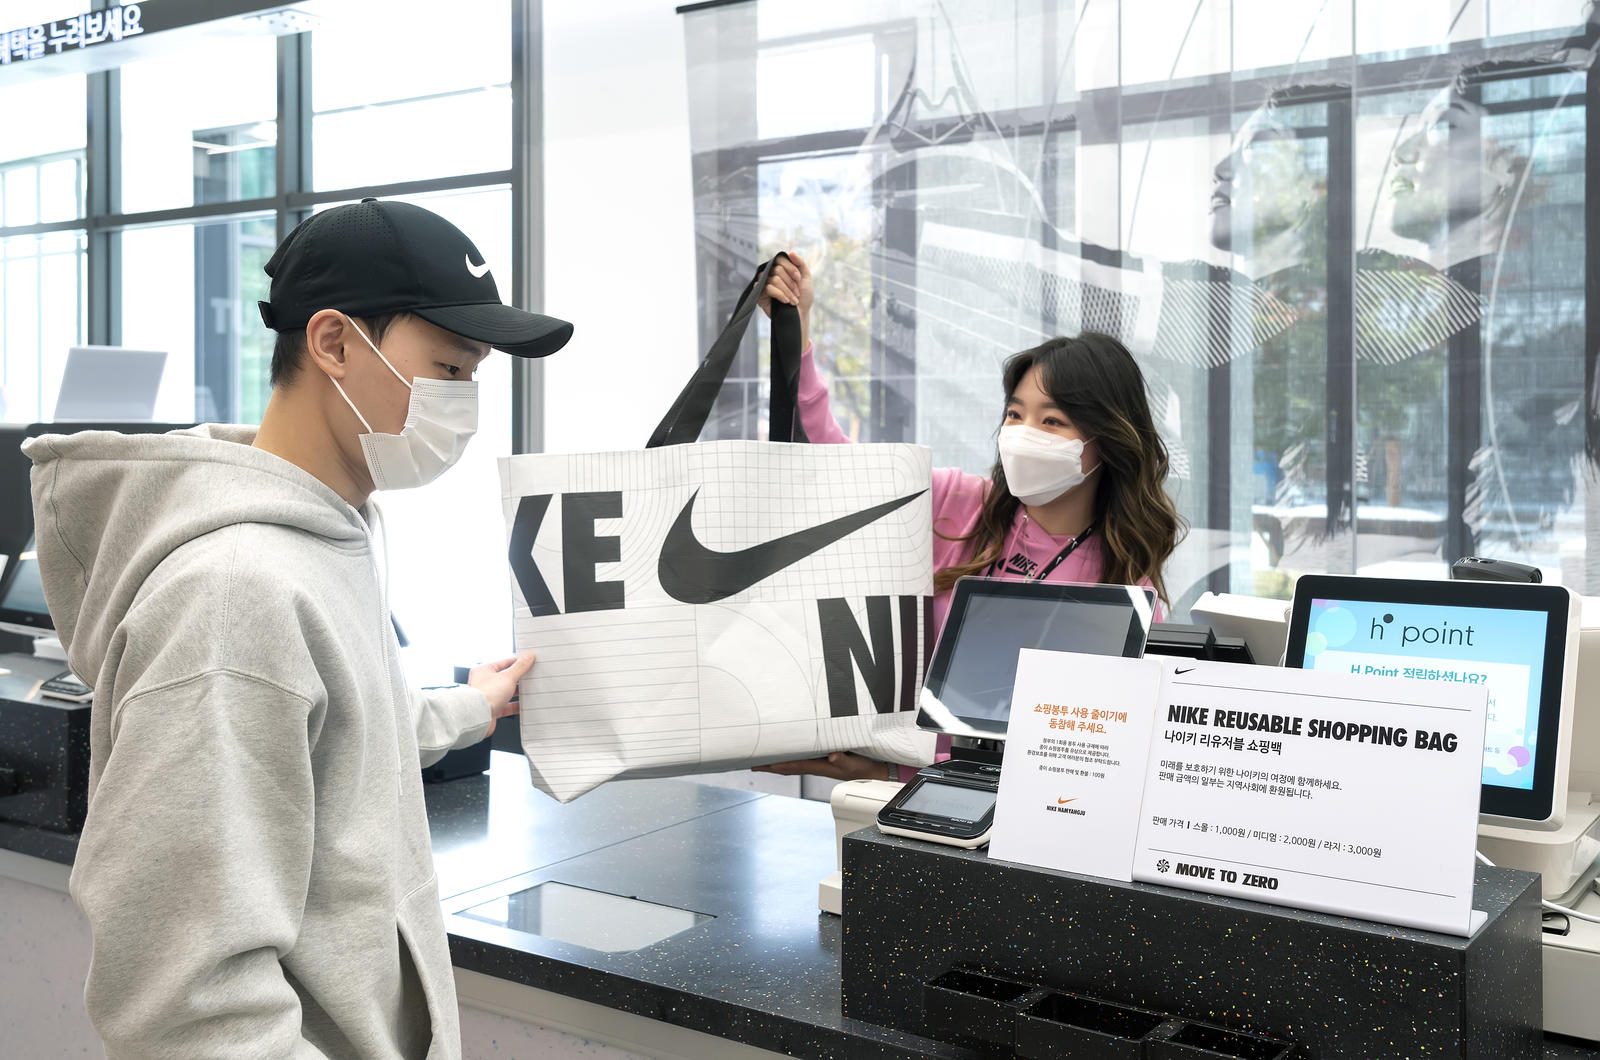 Reciclar Subproducto Elucidación BDS or strategy? Nike's move to end Israel sales prompts questions on  'motives' - Doha News | Qatar